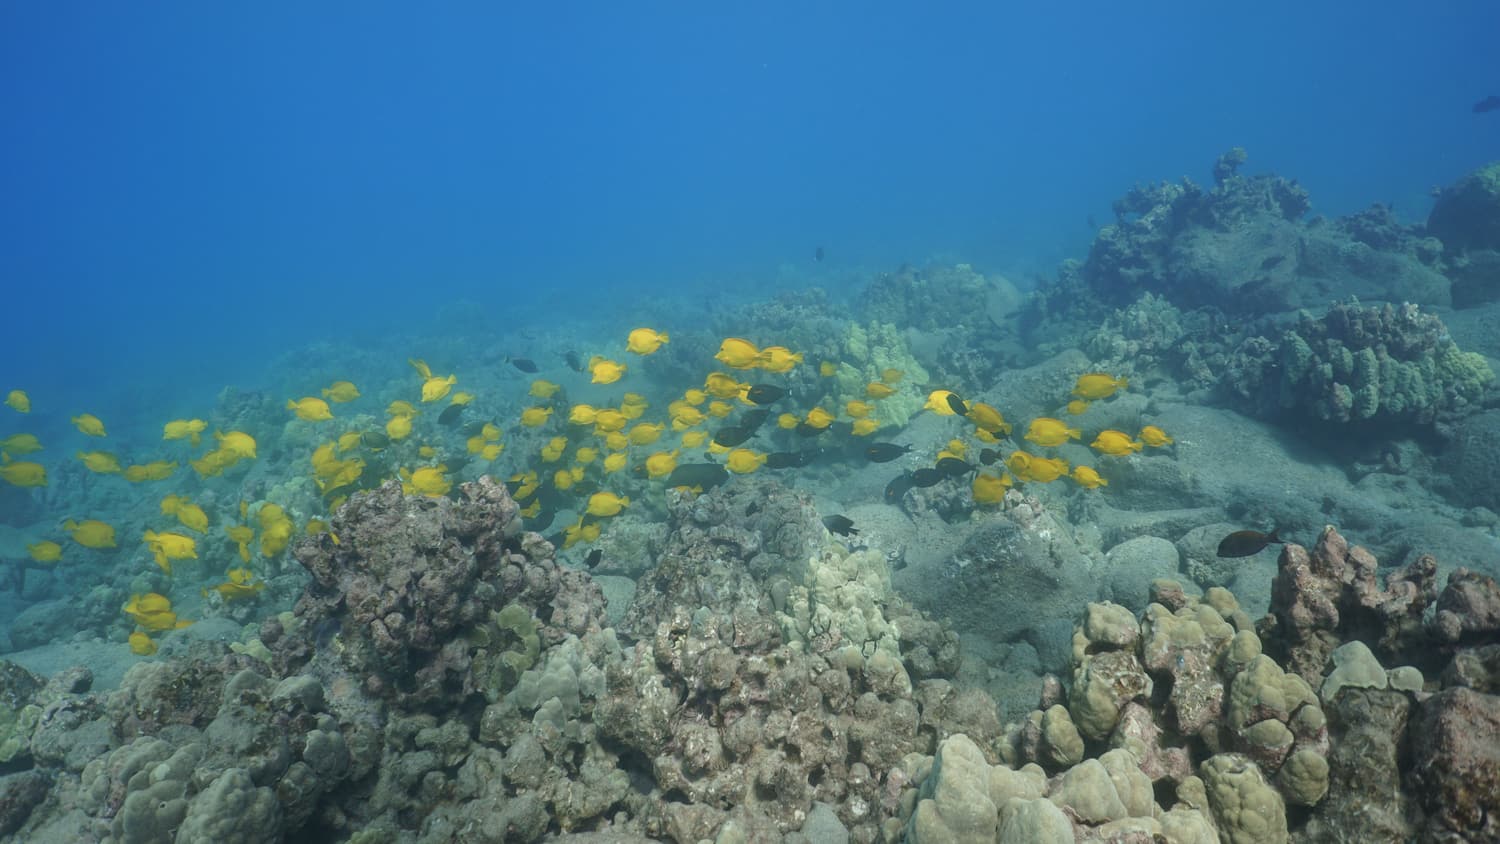 A large group of yellow tang swimming near the ocean floor.